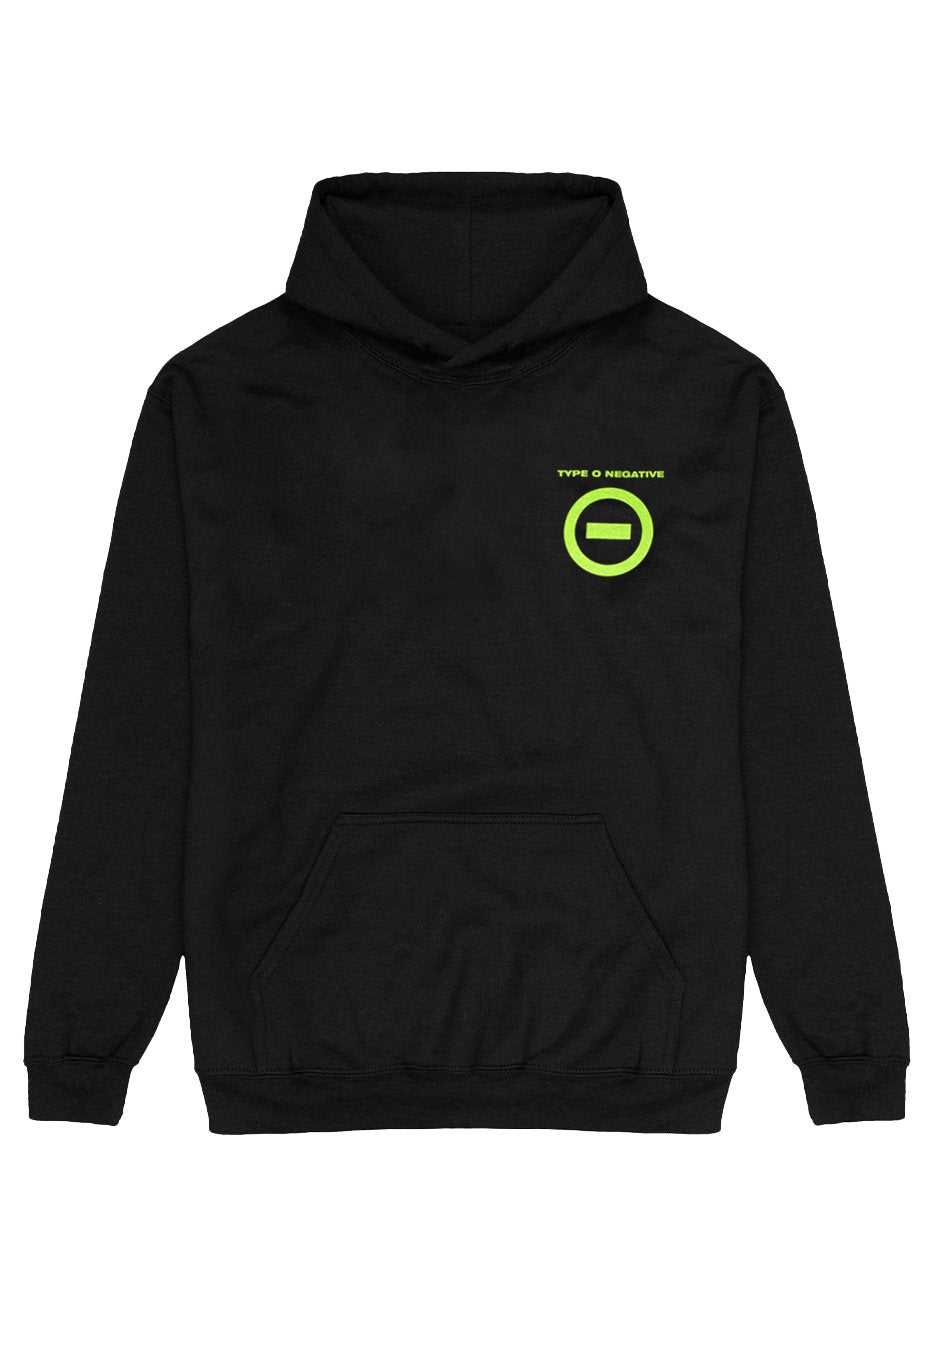 Type O Negative - Express Yourself - Hoodie